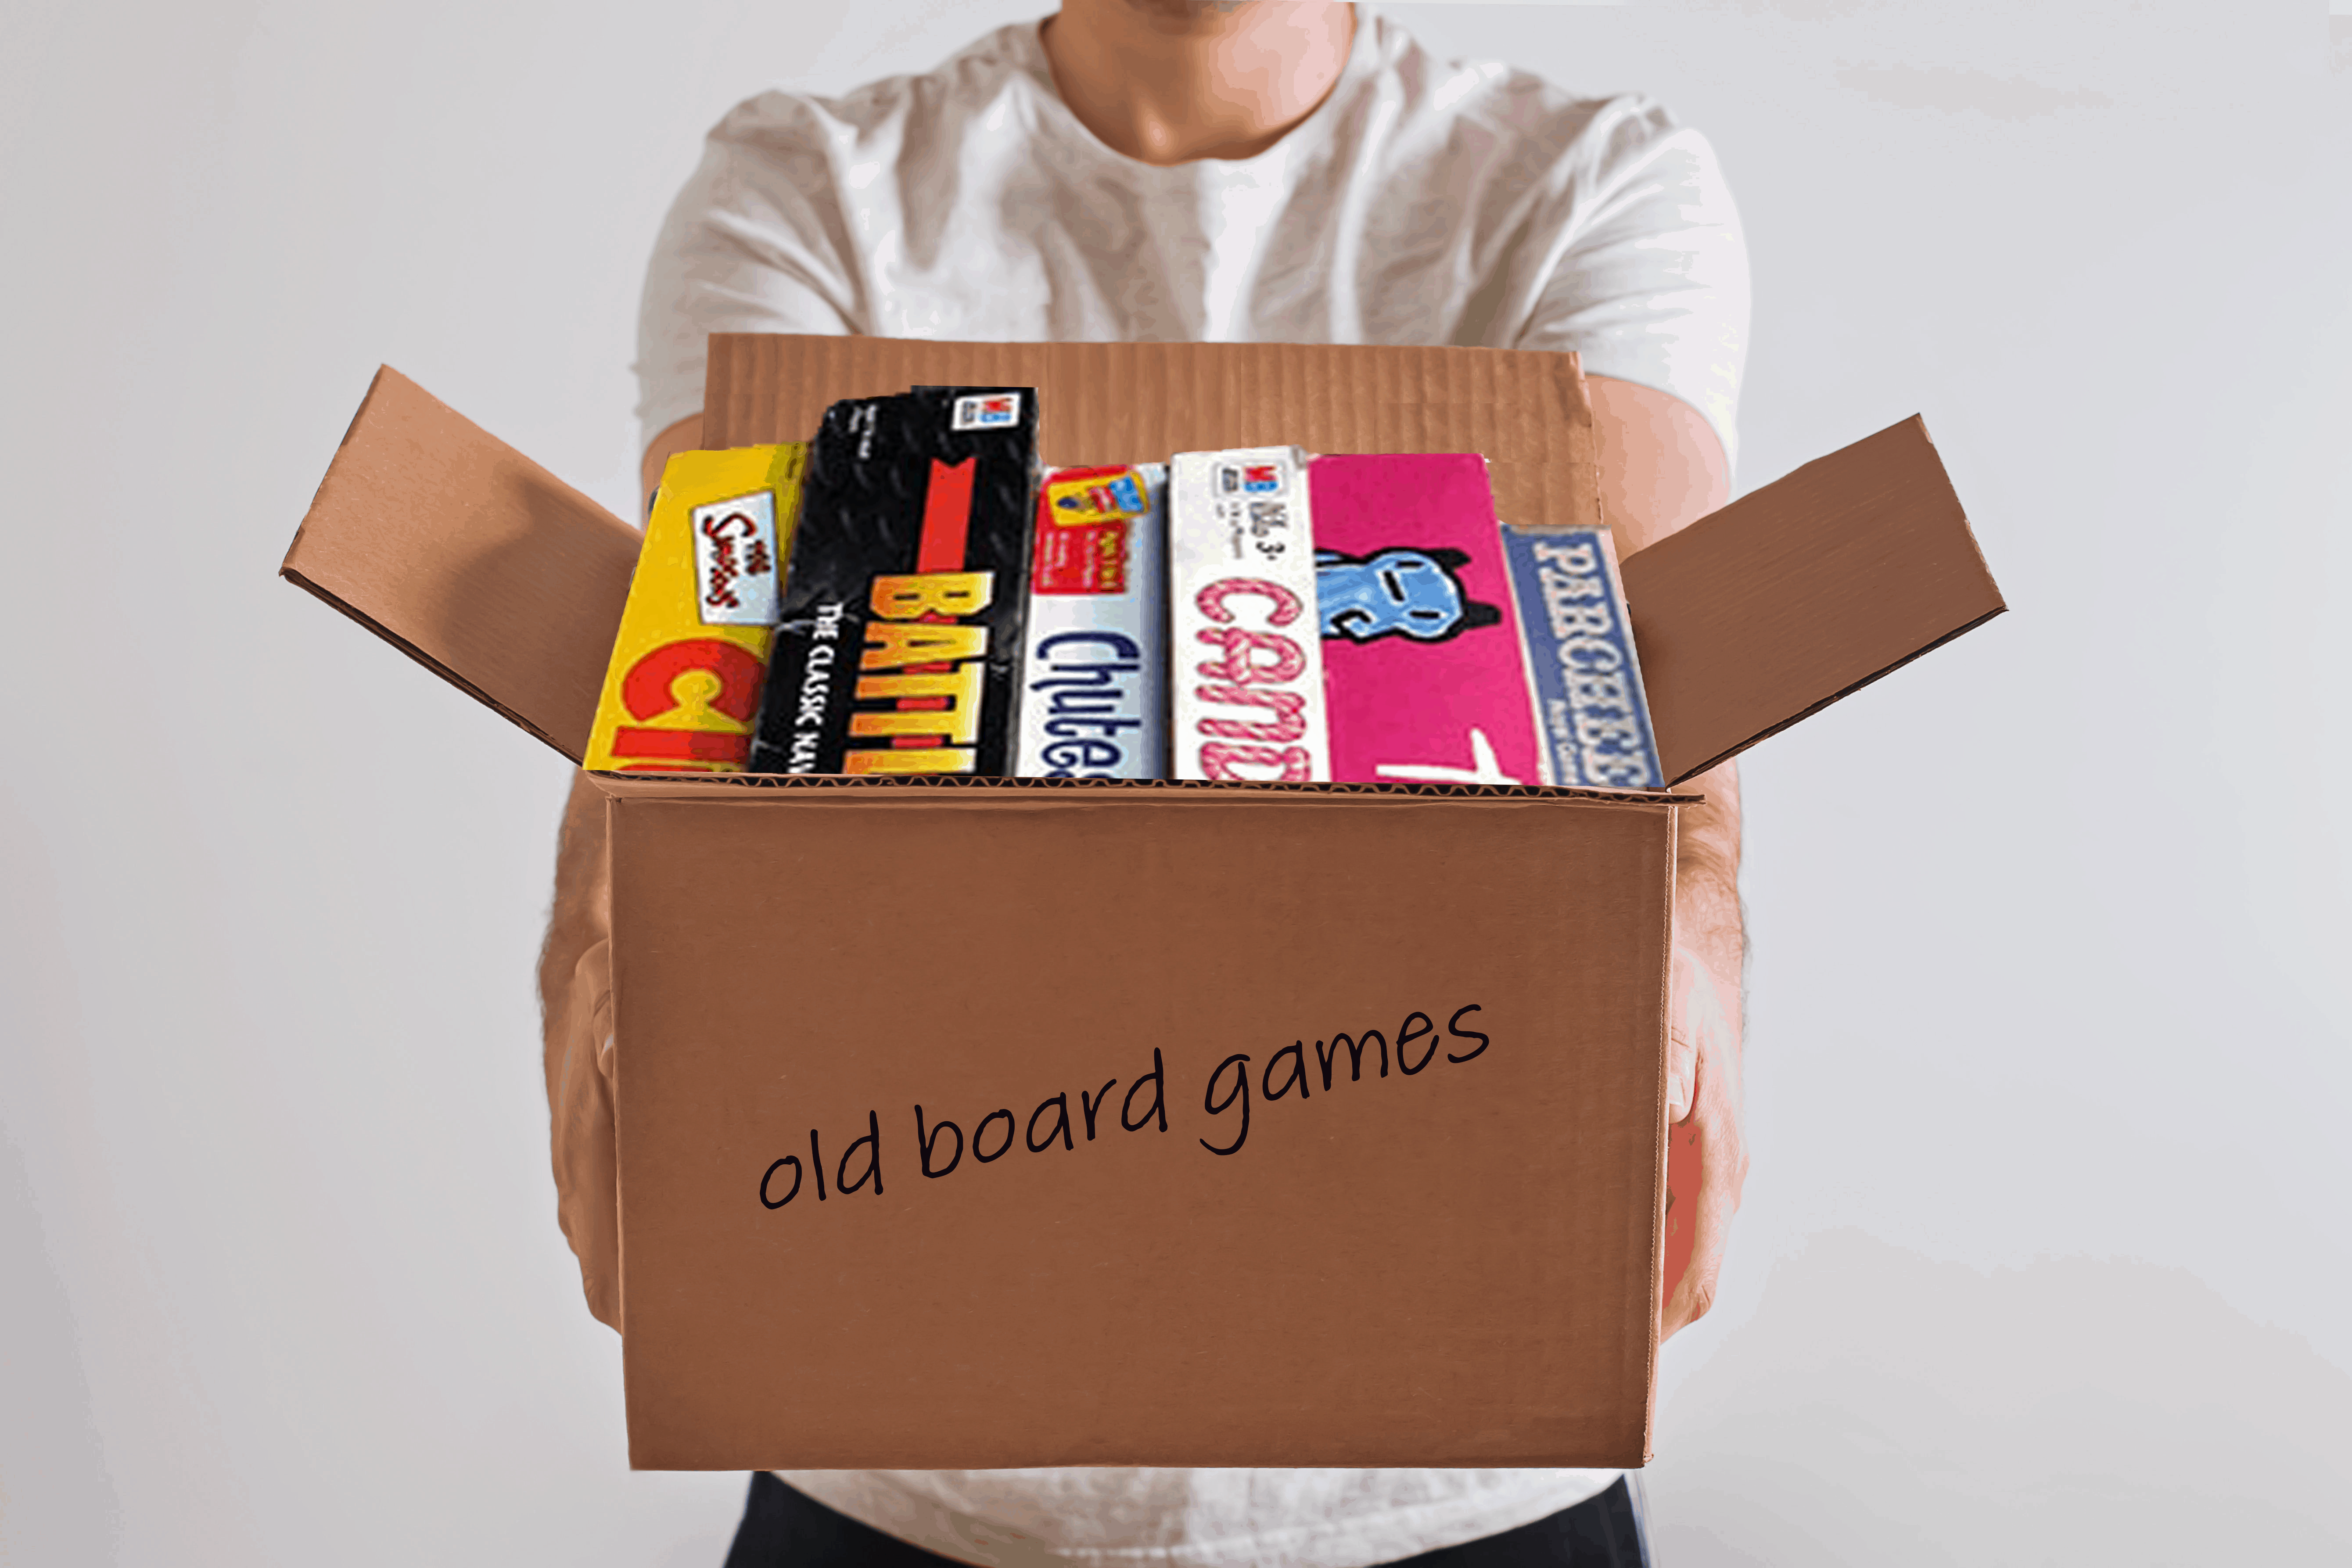 Where to donate old board games